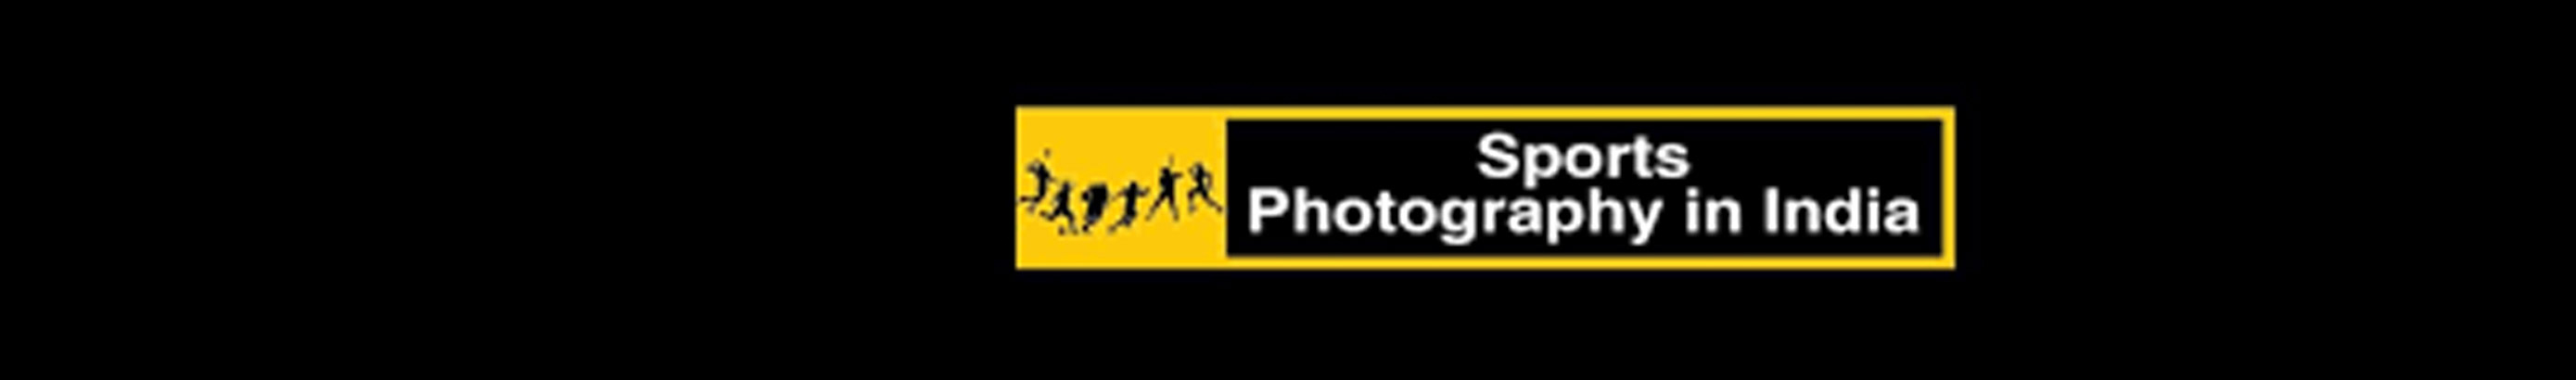 sports photography in India's profile banner